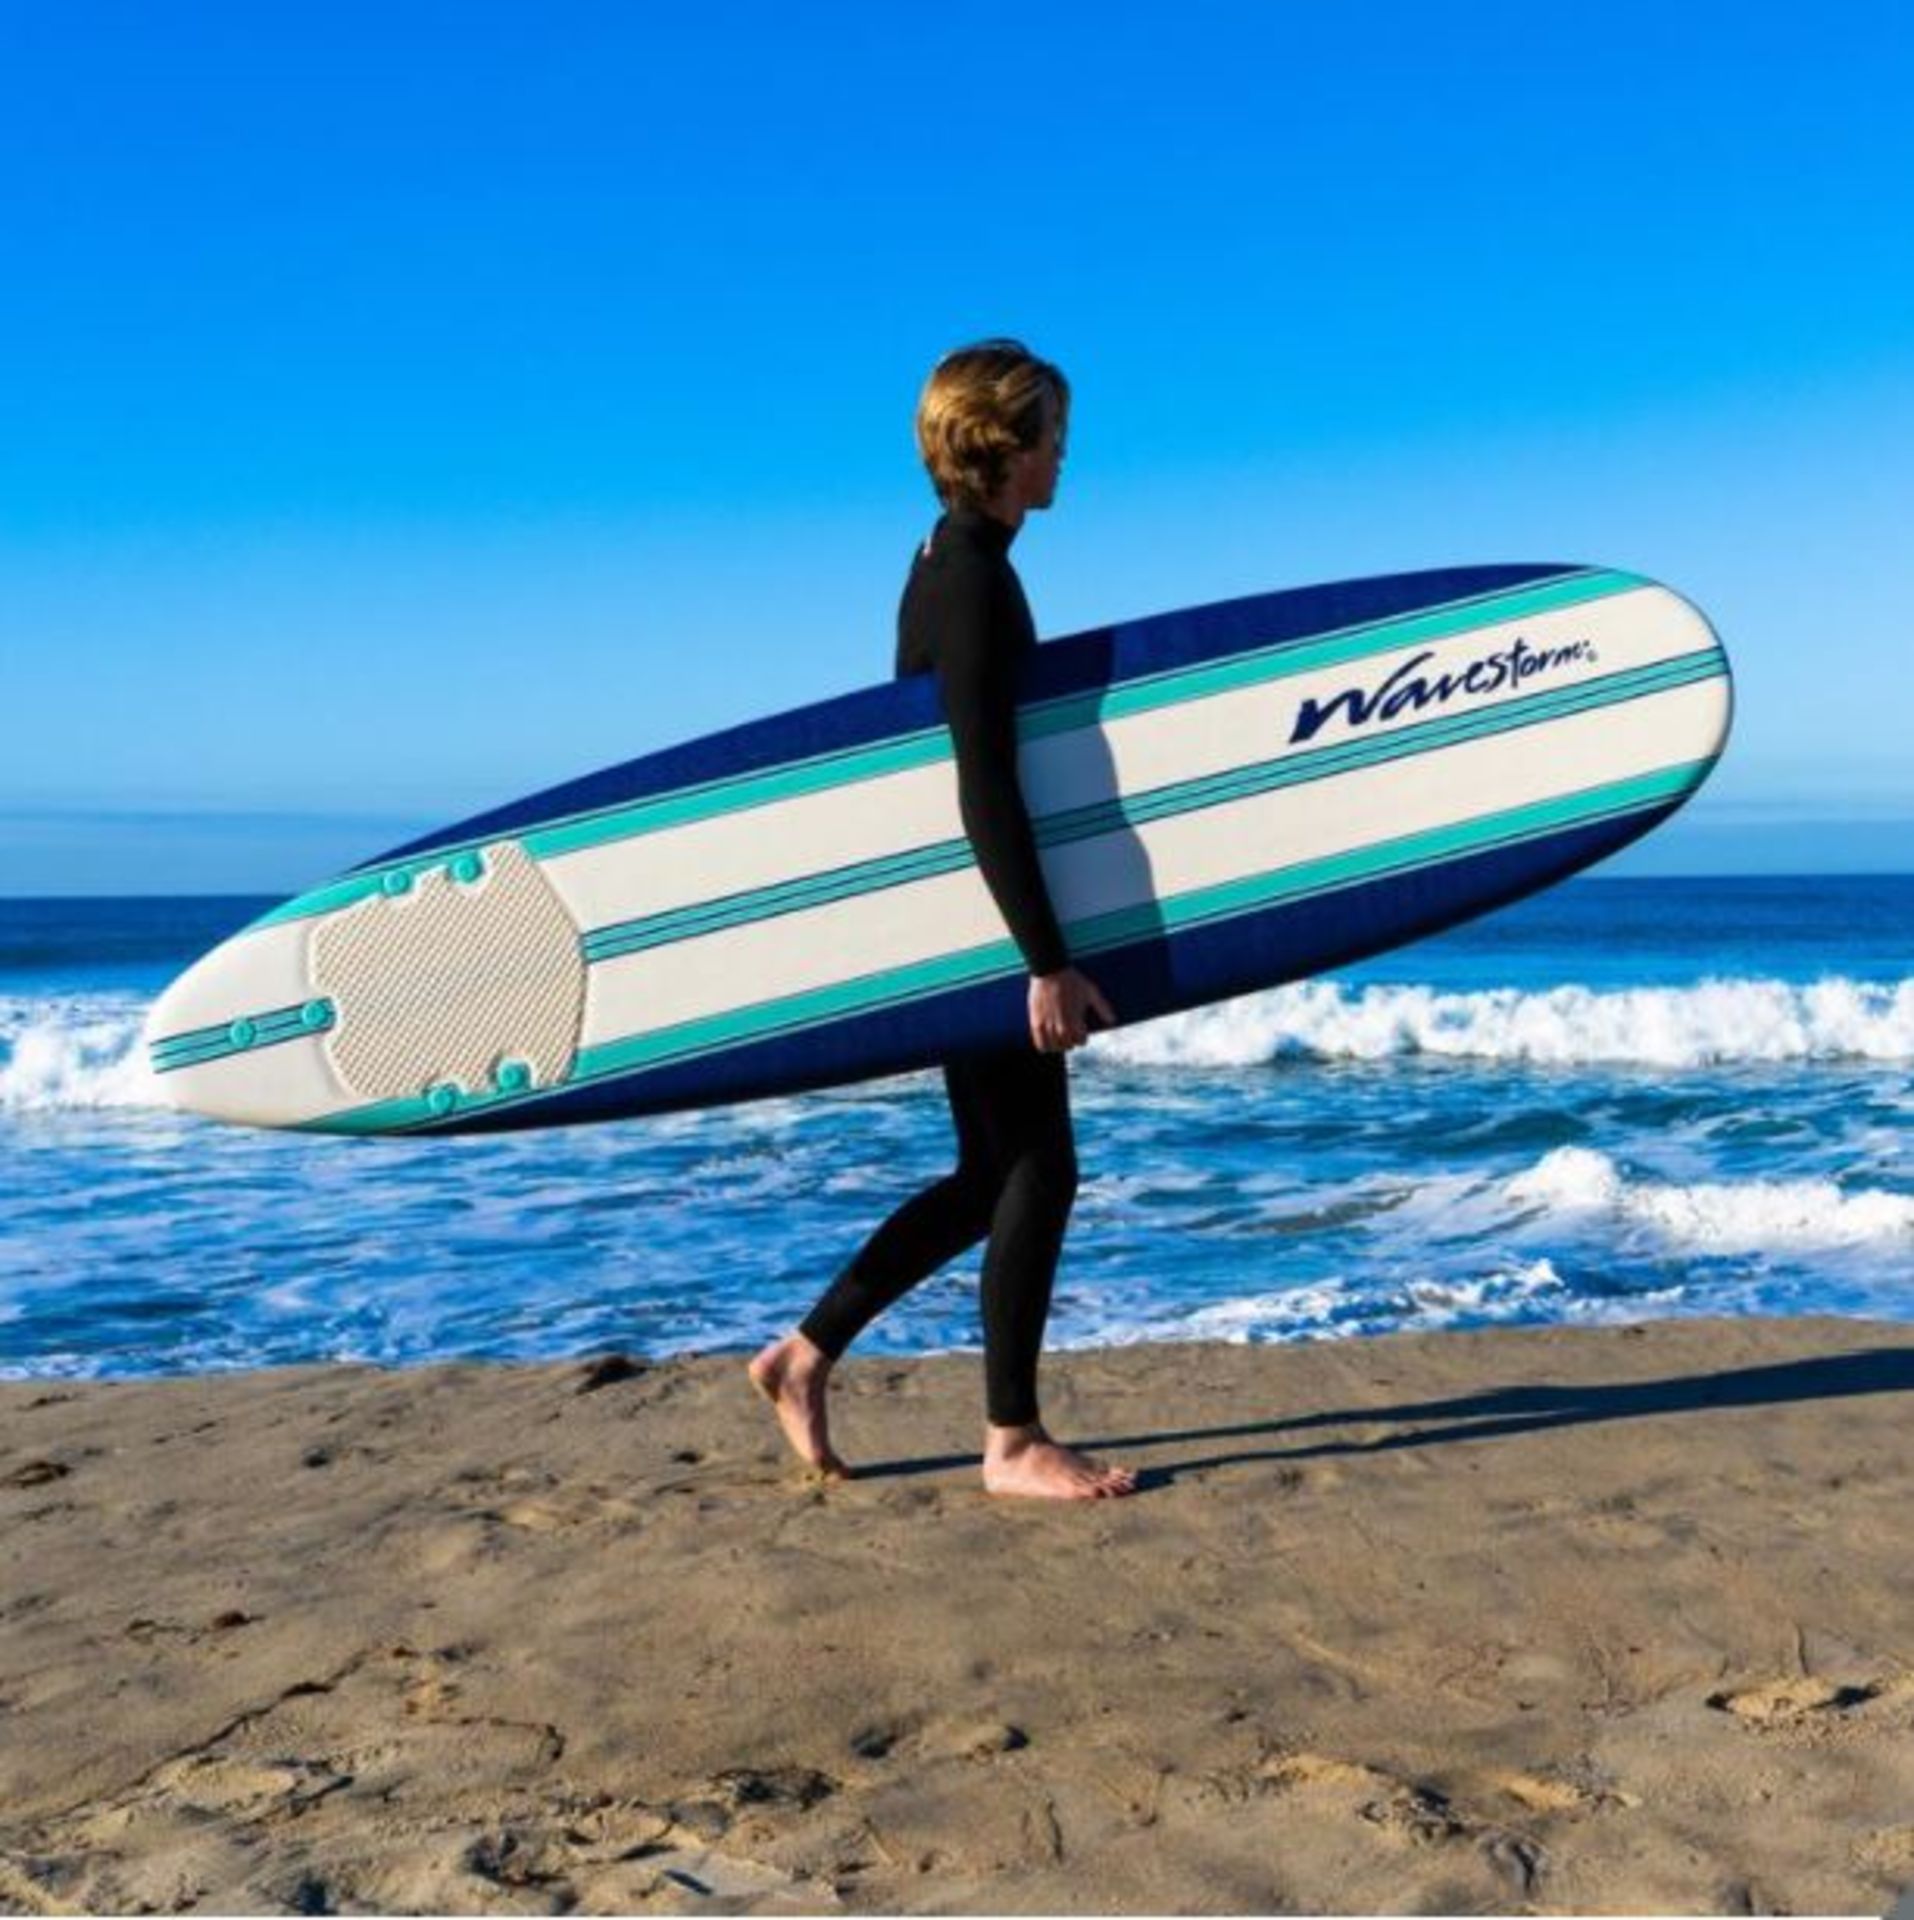 1 WAVESTORM 8FT CLASSIC LIGHTWEIGHT SURFBOARD RRP Â£199 (NO FINS, PICTURES FOR ILLUSTRATION PURPOSES